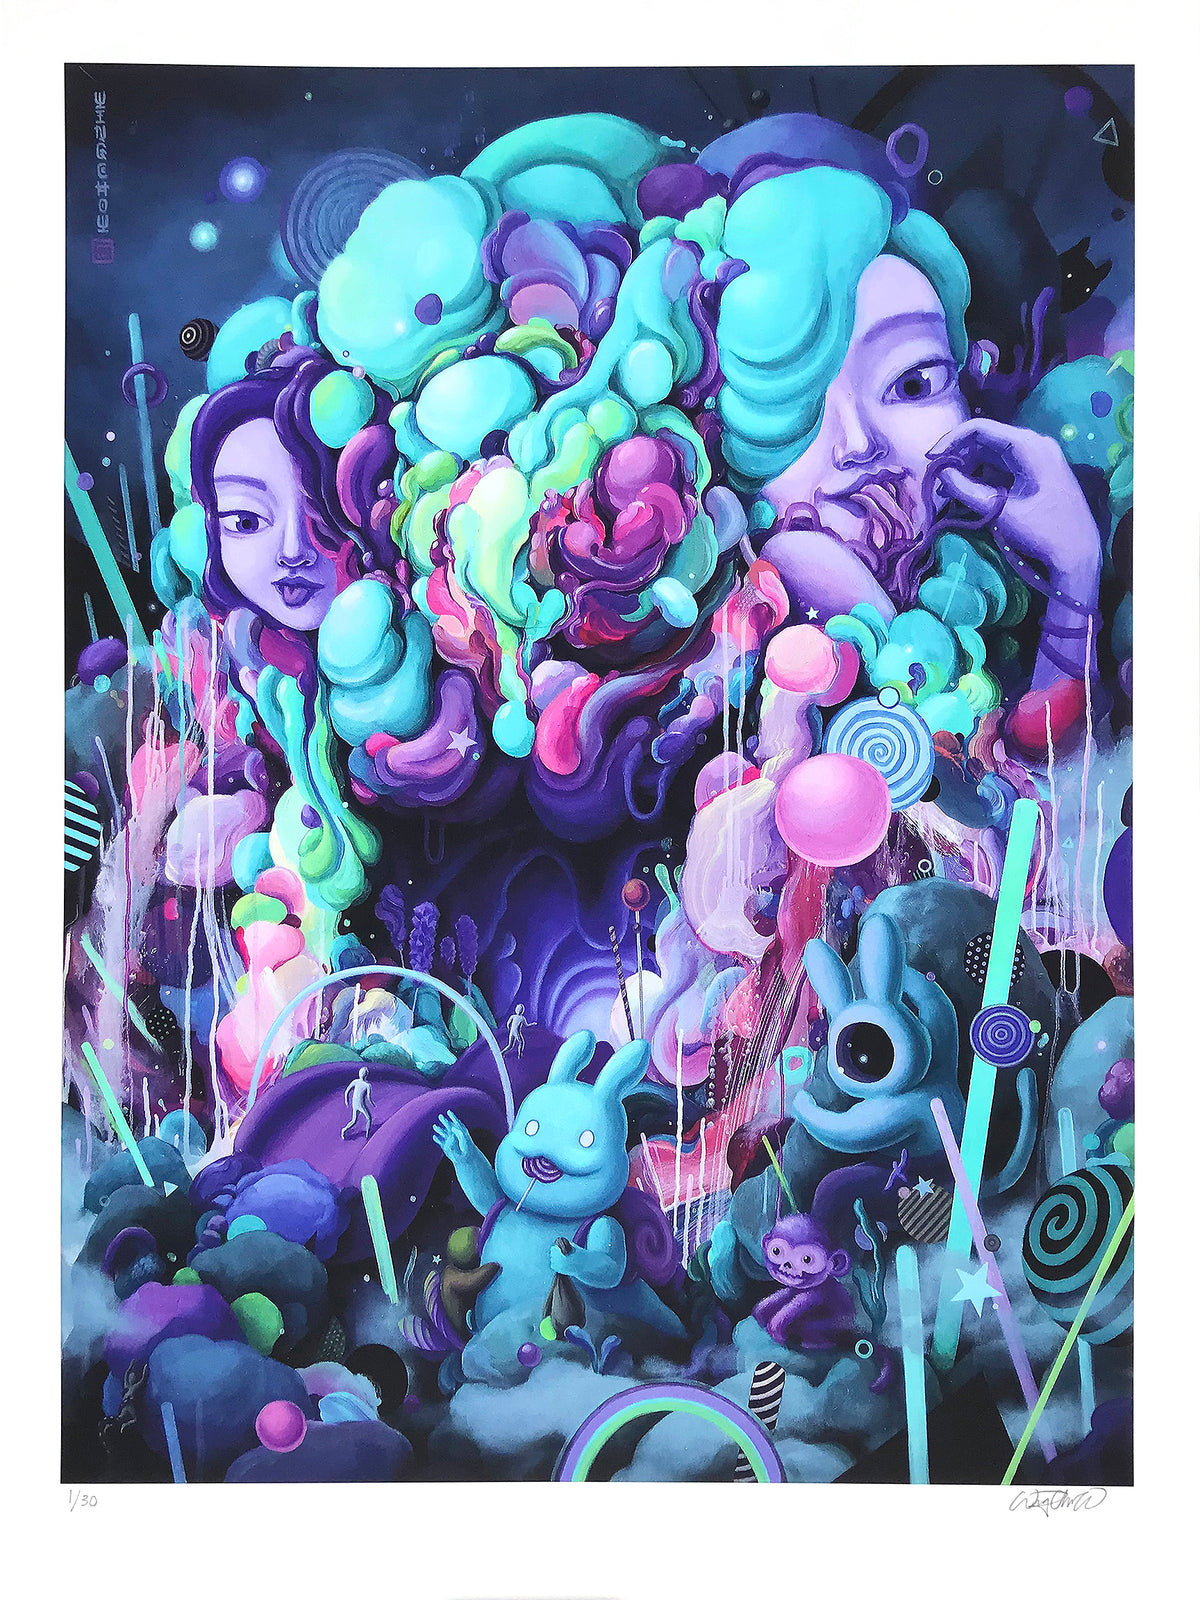 Wingchow &quot;Candy Eaters Den&quot; - Archival Print, Limited Edition of 30 - 18 x 24&quot;